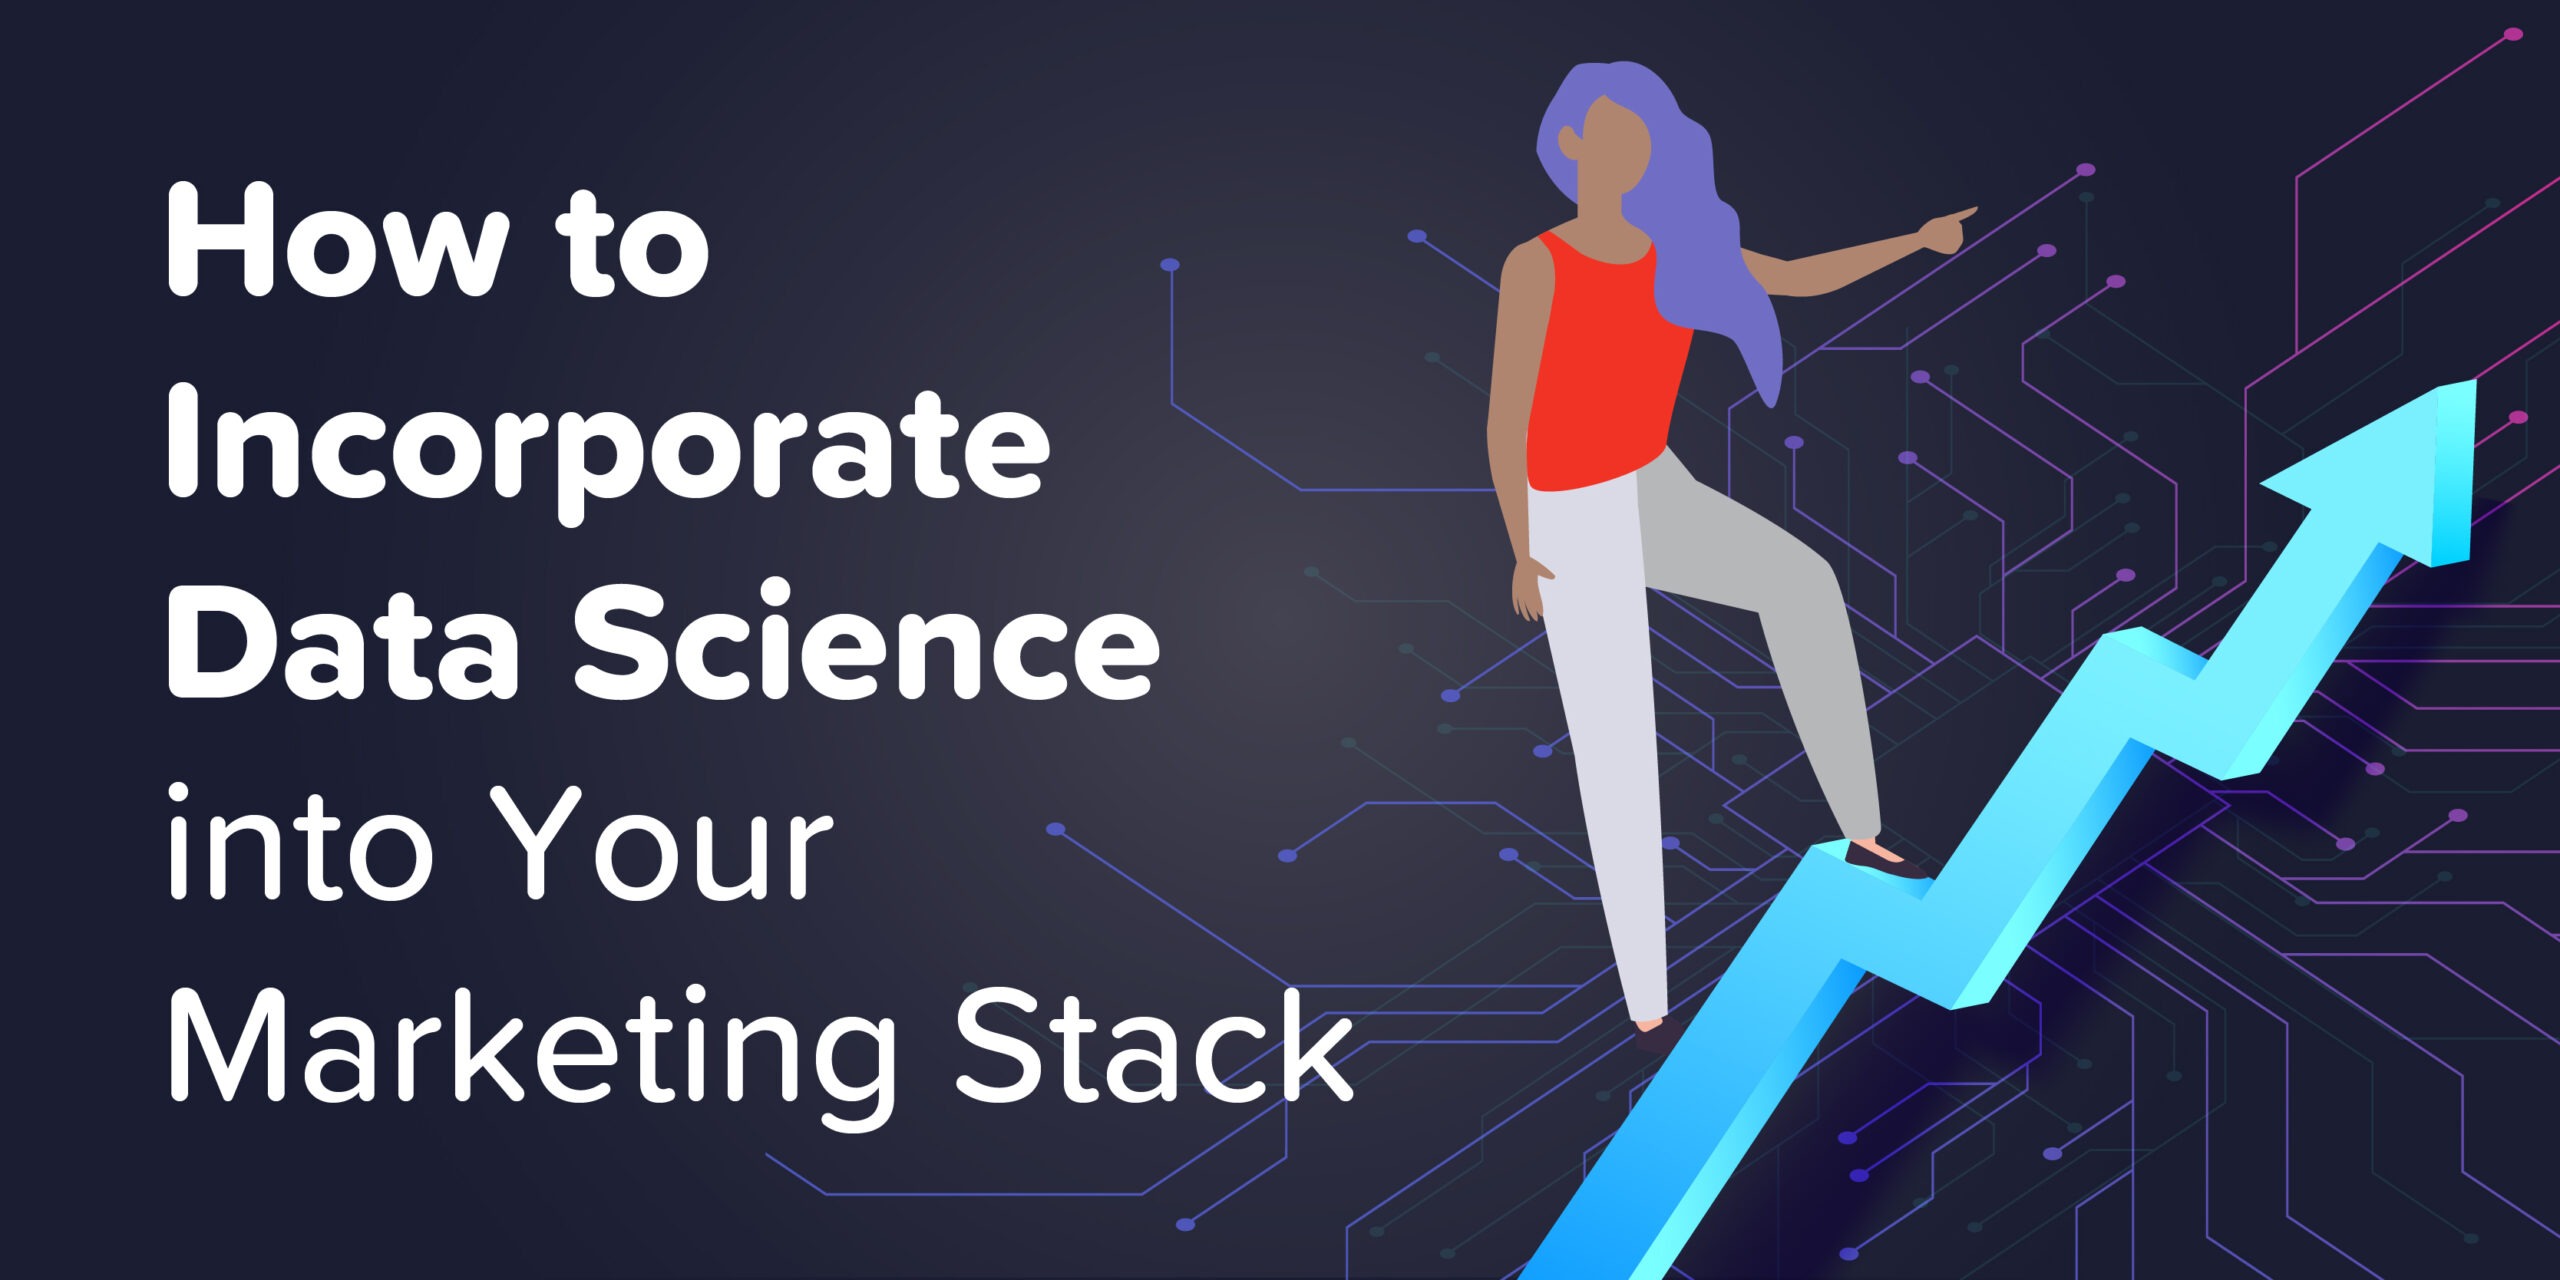 How to Incorporate Data Science Into Your Marketing Stack